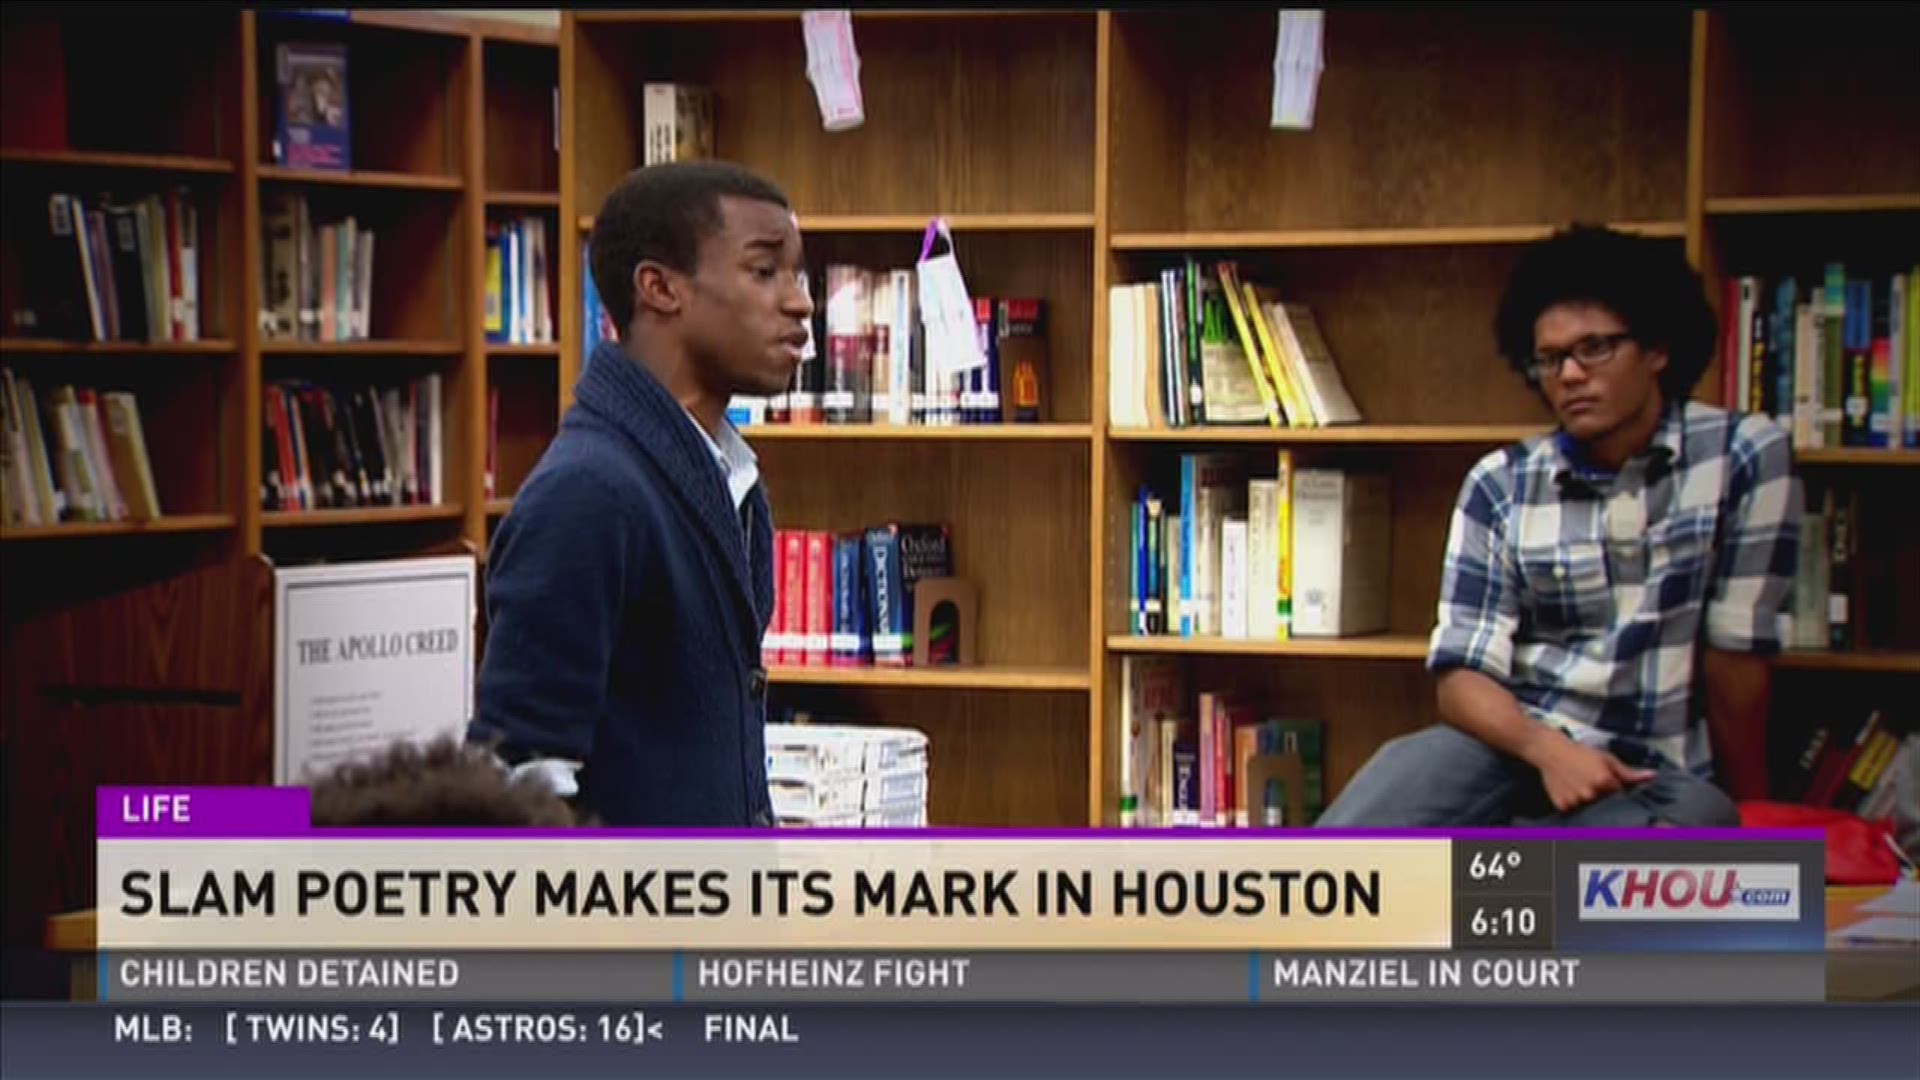 There's a kind of street poetry that's making the rounds at Houston ISD campuses, even in juvenile detention centers.